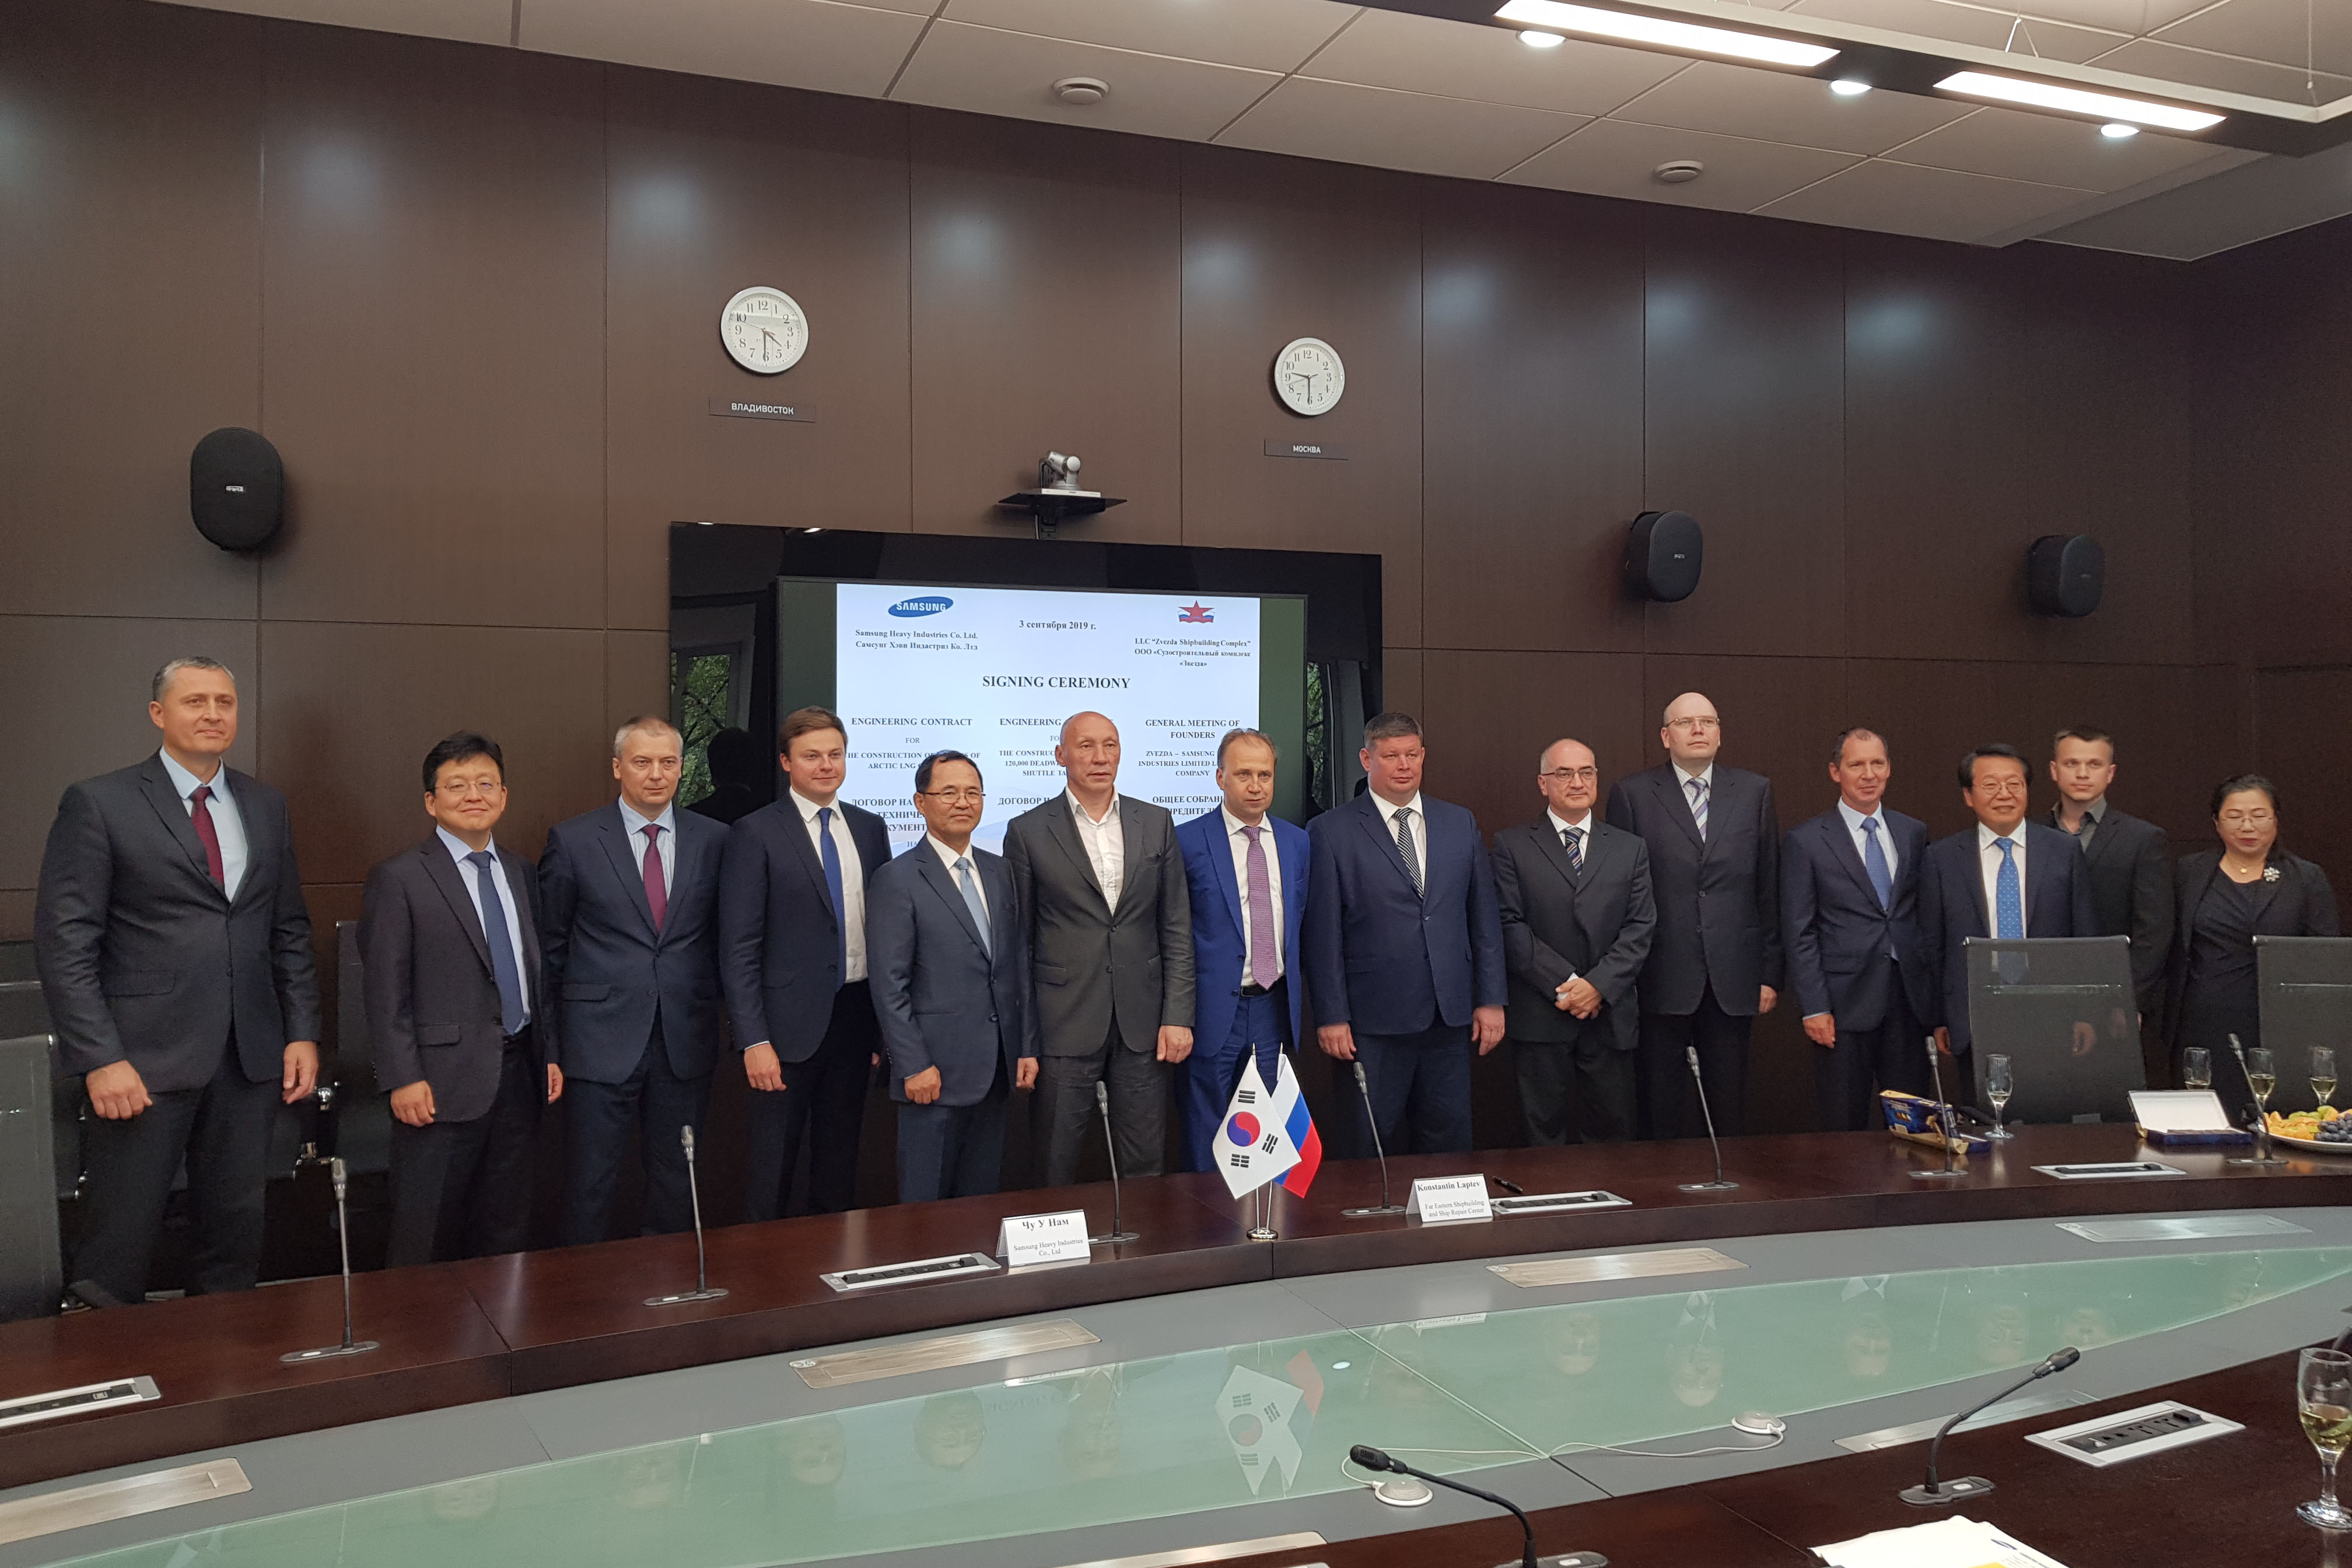 SHI partners up with Zvezda on Arctic LNG 2 carriers